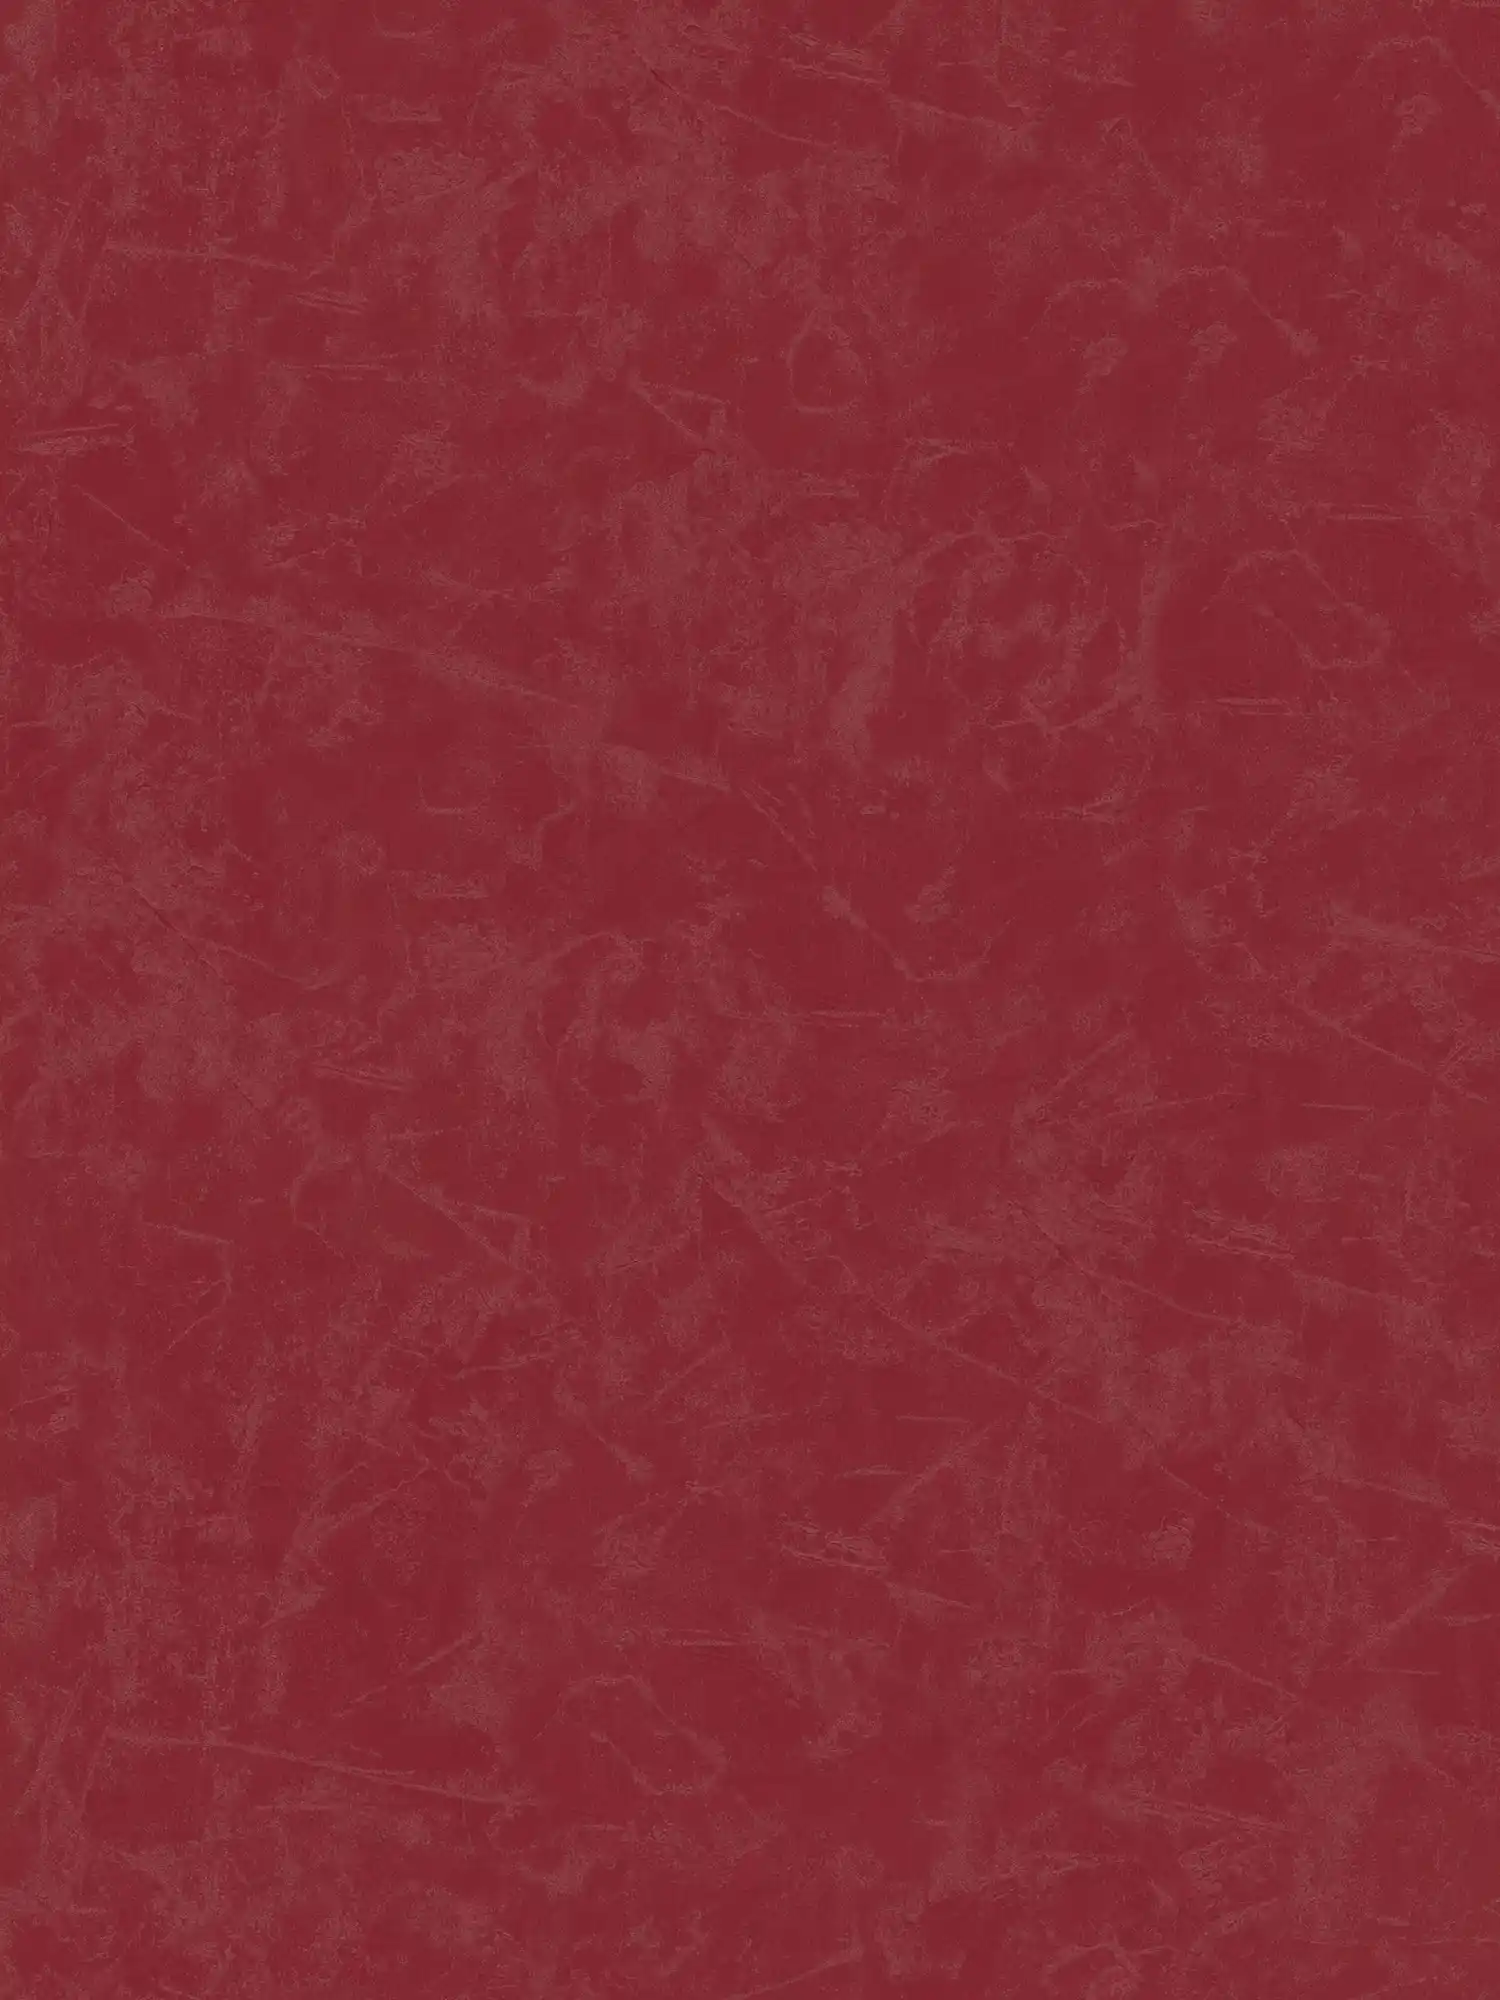 Non-woven wallpaper plains with plaster look & texture pattern - red
